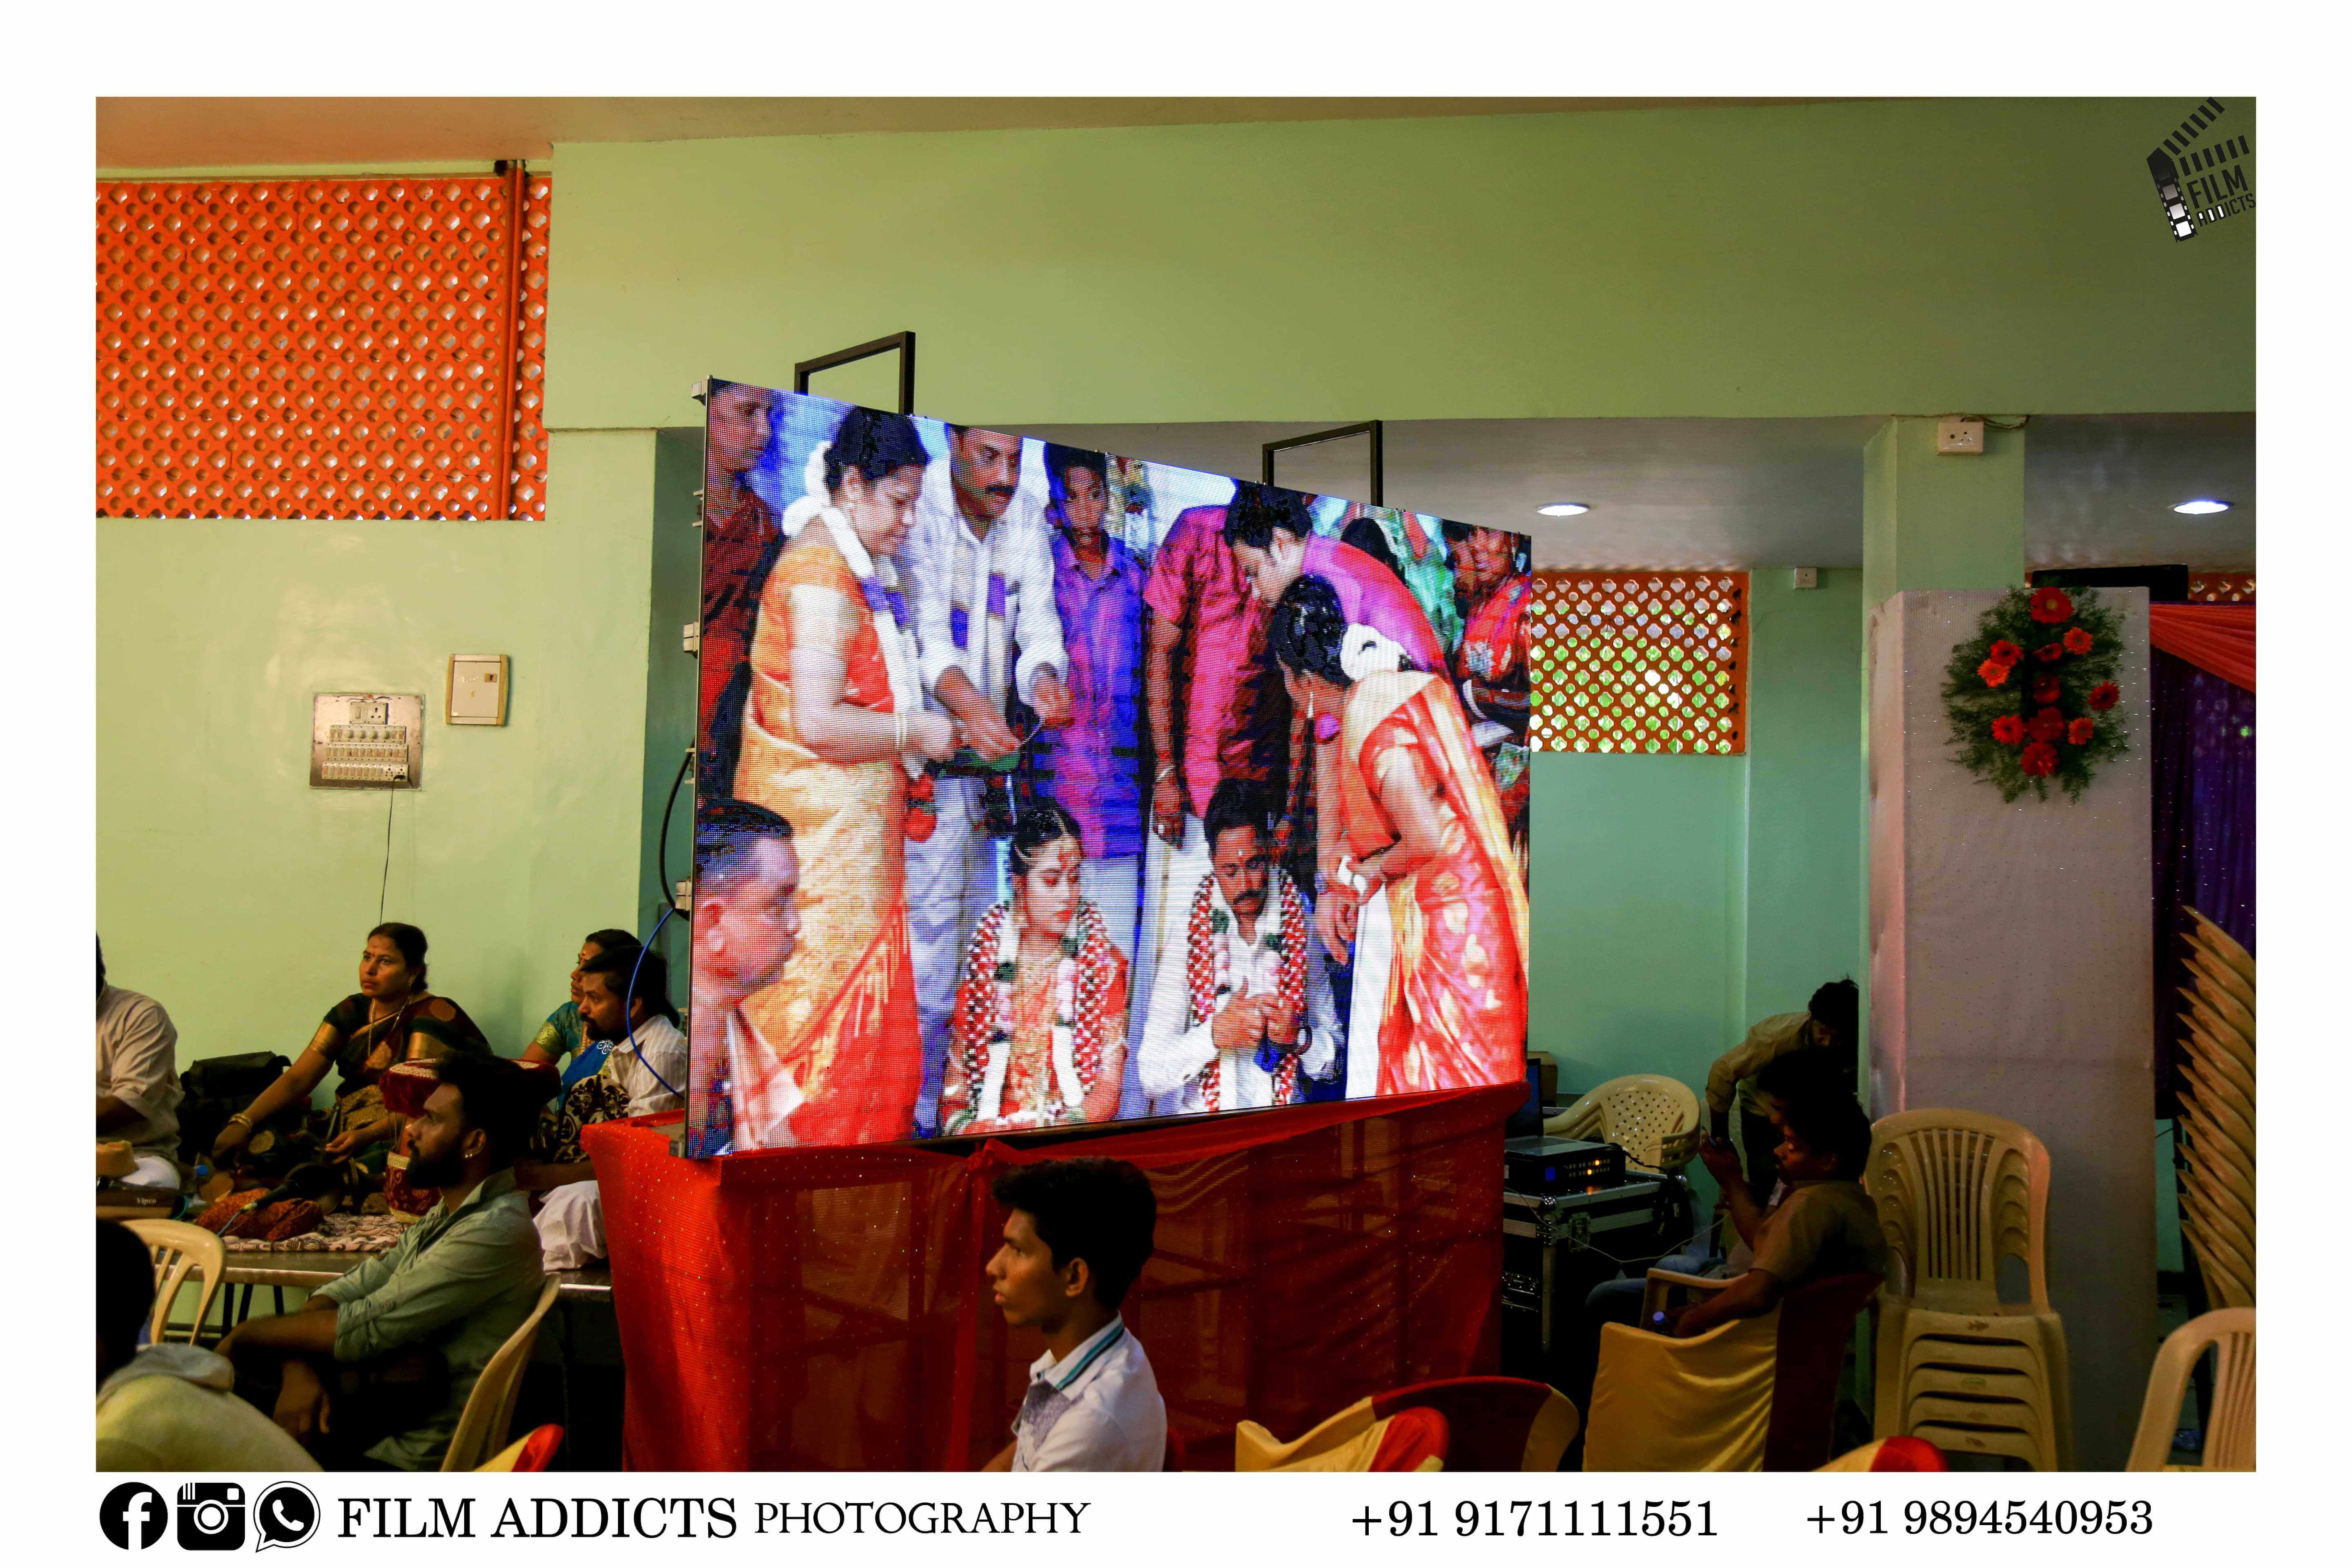 Led wall in sivagangai, Led wall rental in sivagangai, Led wall display in sivagangai, Led wall wedding in sivagangai, Led wall for wedding reception, Led wall event in sivagangai, Led wall event management in sivagangai, Led video wall for events in sivagangai, led video wall rental in sivagangai, wedding led video wall rental & hiring sivagangai, marriage led video wall rental & hiring in sivagangai, wedding led screen rental sivagangai, marriage led screen sivagangai, indoor & outdoor led video wall in sivagangai, led wall in marriage, led wall rental in sivagangai, led rental, led video wall hiring sivagangai, marriage led screen, wedding led screen rental,live streaming in sivagangai, live streaming, live tv, live streaming wedding, wedding live streaming sivagangai, marriage live streaming sivagangai, live streaming services in sivagangai, live streaming wedding sivagangai.